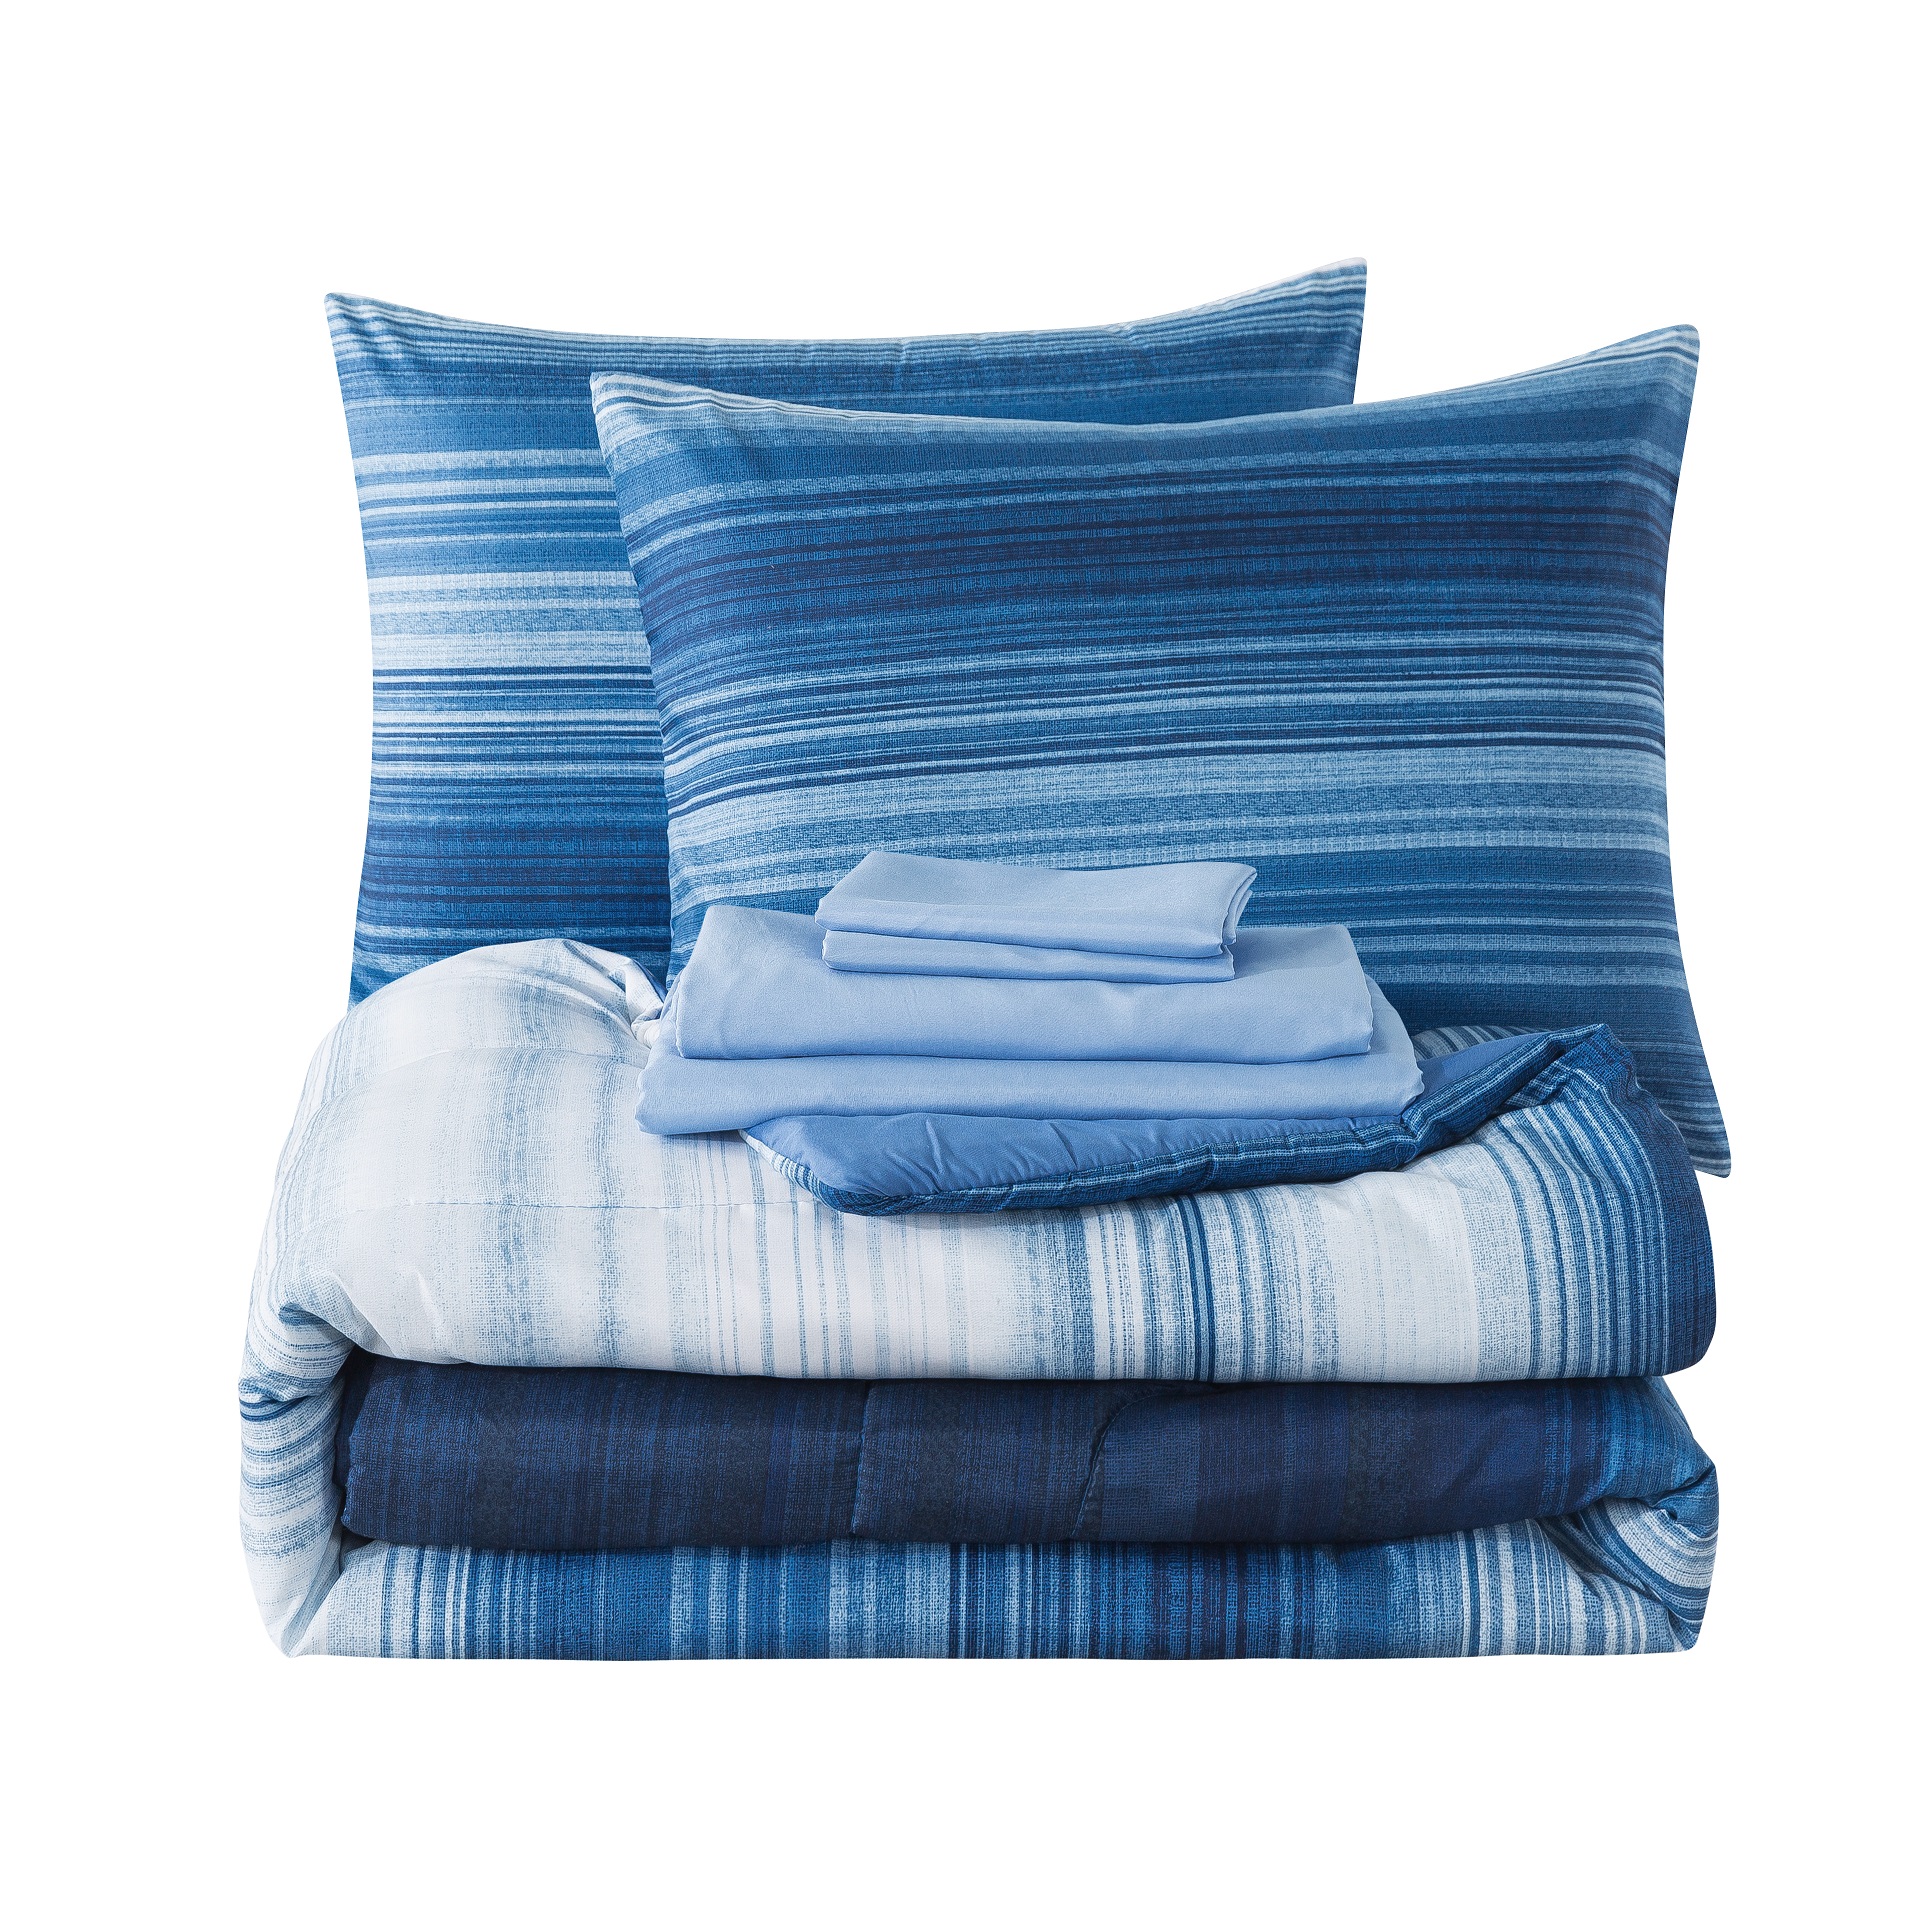 Mainstays Blue Stripe 6 Piece Bed in a Bag Comforter Set With Sheets, Twin/Twin XL - image 5 of 8